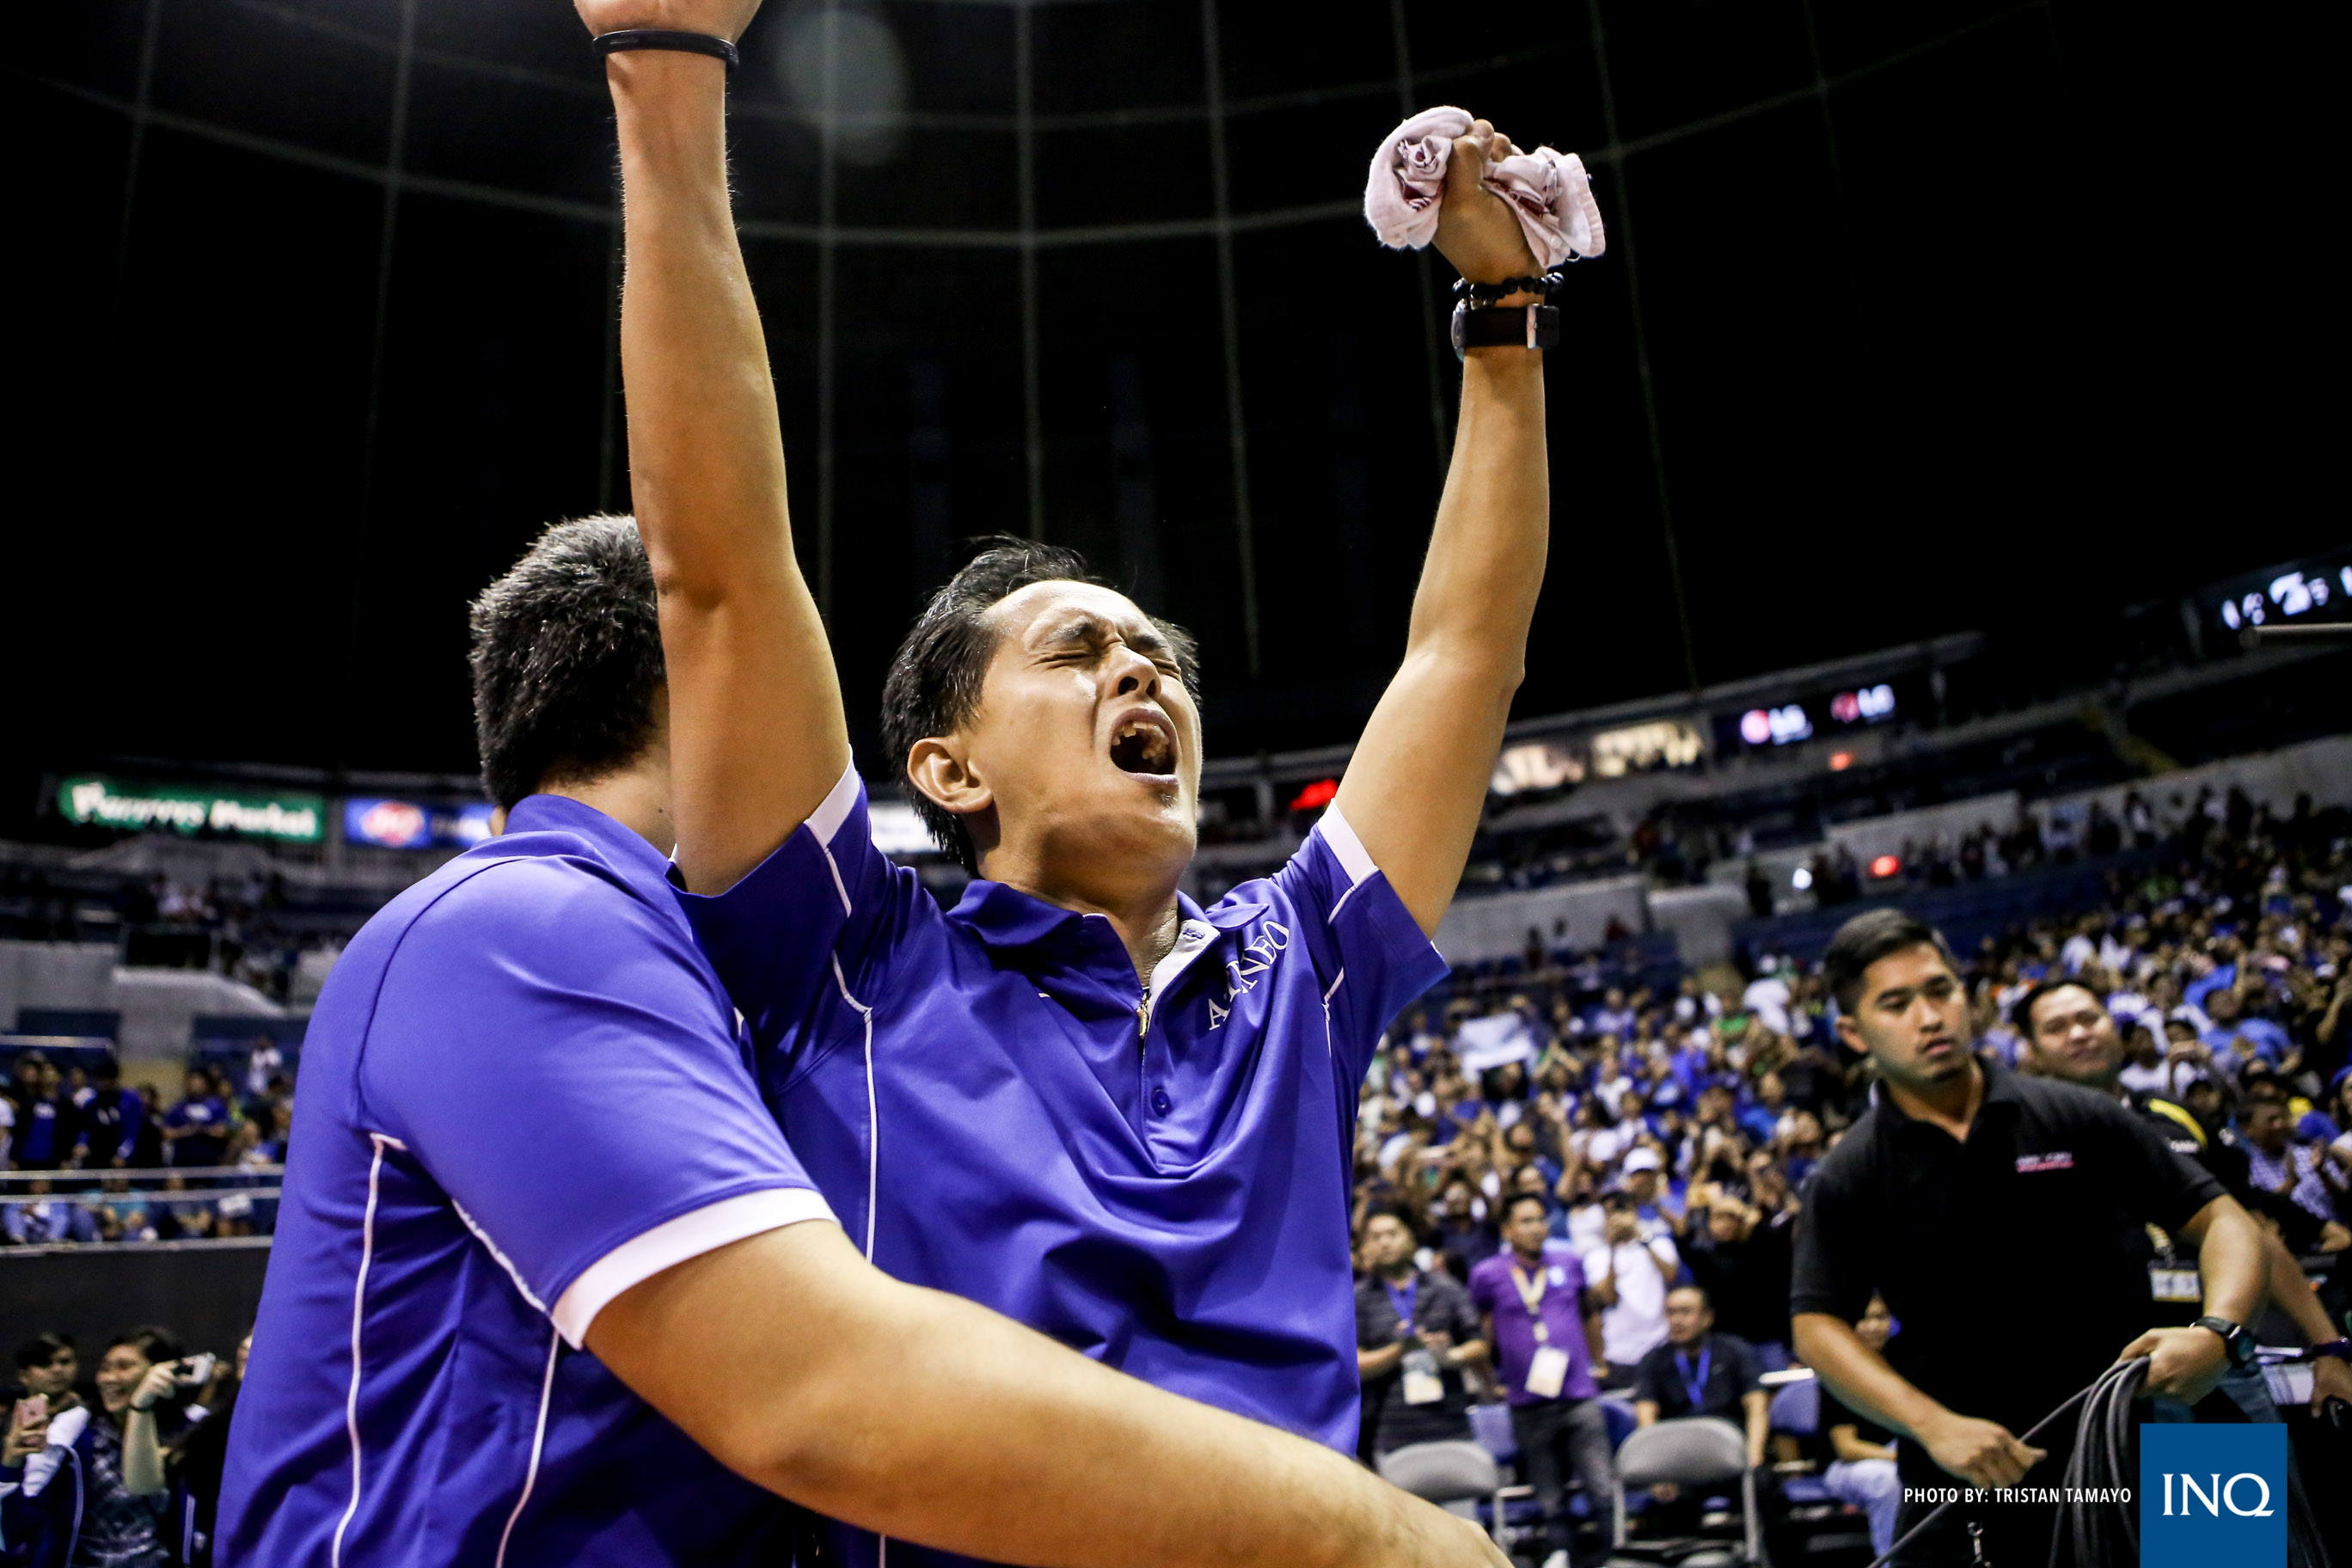 Ateneo head coach Oliver Almadro celebrates after leading the Blue Eagles to their third straight title after sweeping the National University Bulldogs in the UAAP Season 79 men's volleyball Finals on Saturday, May 6, 2017, at Smart Araneta Coliseum. Tristan Tamayo/INQUIRER.net